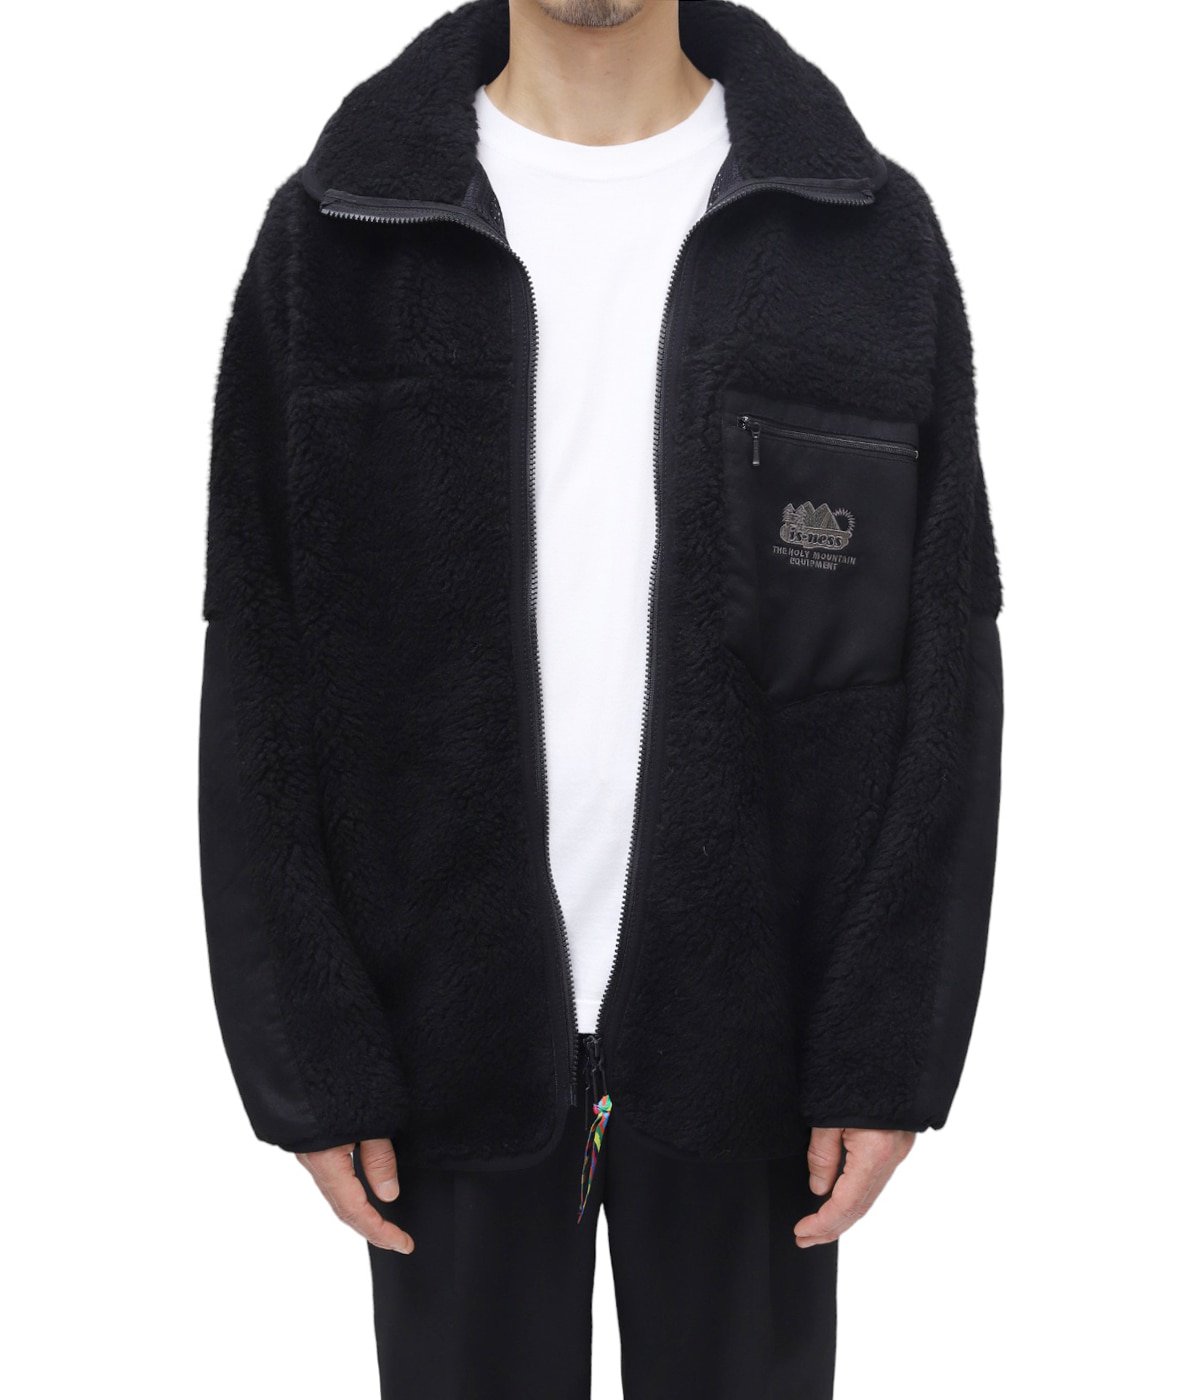 THM FLEECE JACKET is-ness×Y(dot)BY NORDISK | is-ness(イズネス